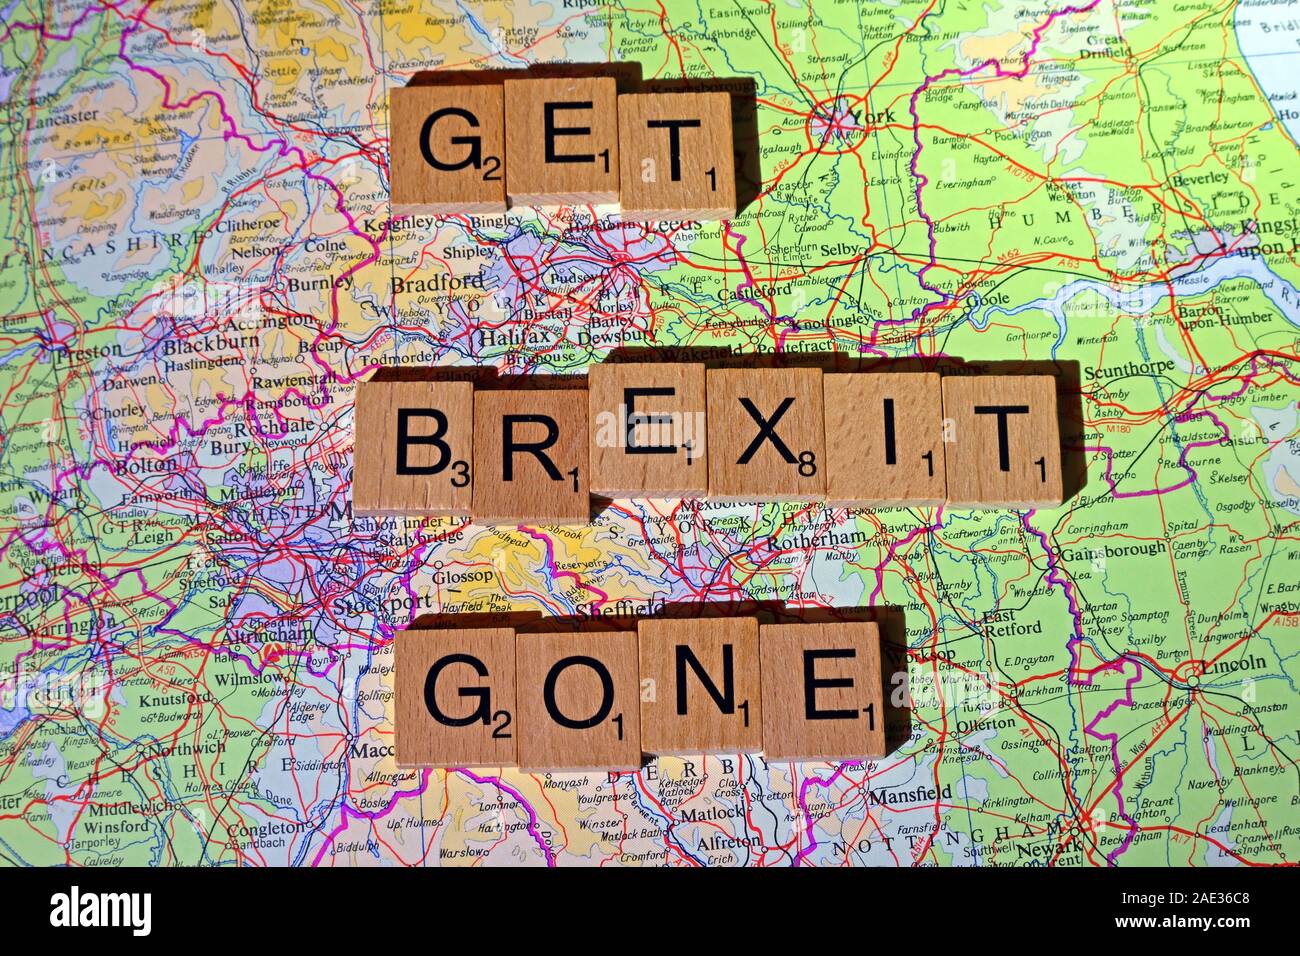 Get Brexit Gone spelled in Scrabble letters on a north of England map - General Election, elections, party political,leaders,parties,claims,doubts Stock Photo